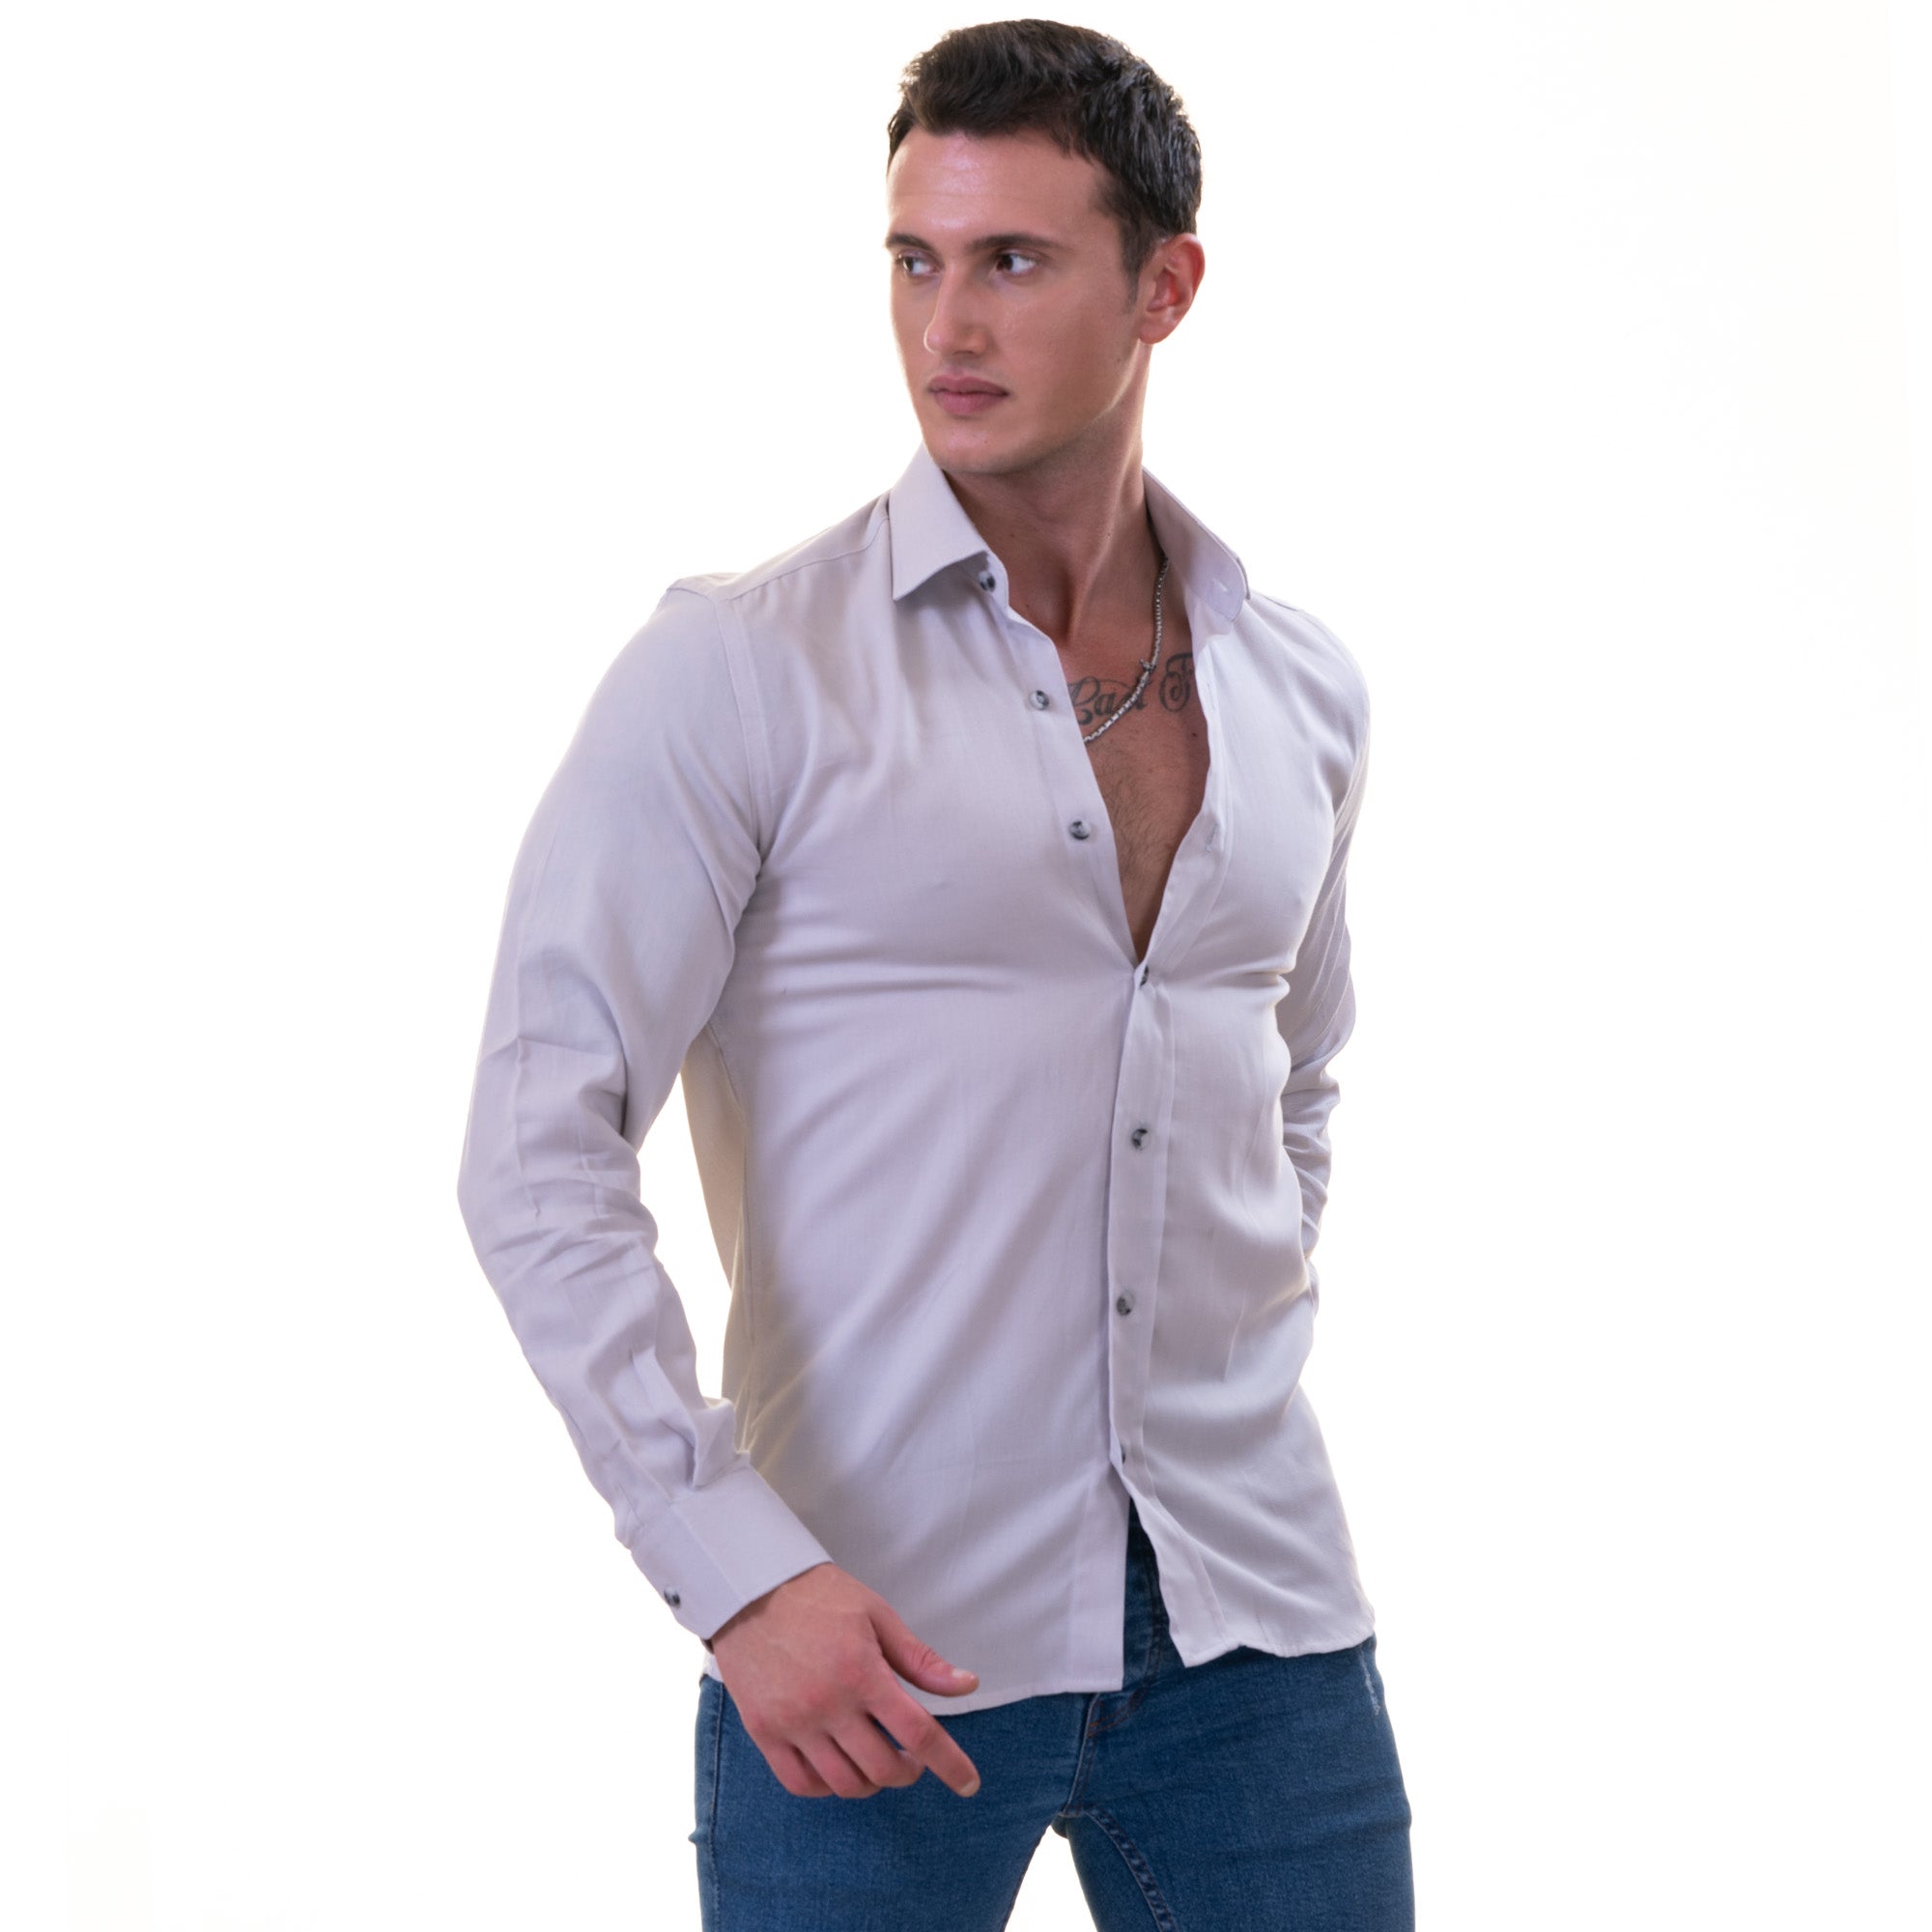 Gray Luxury Men's Tailor Fit Button Up European Made Linen Shirts